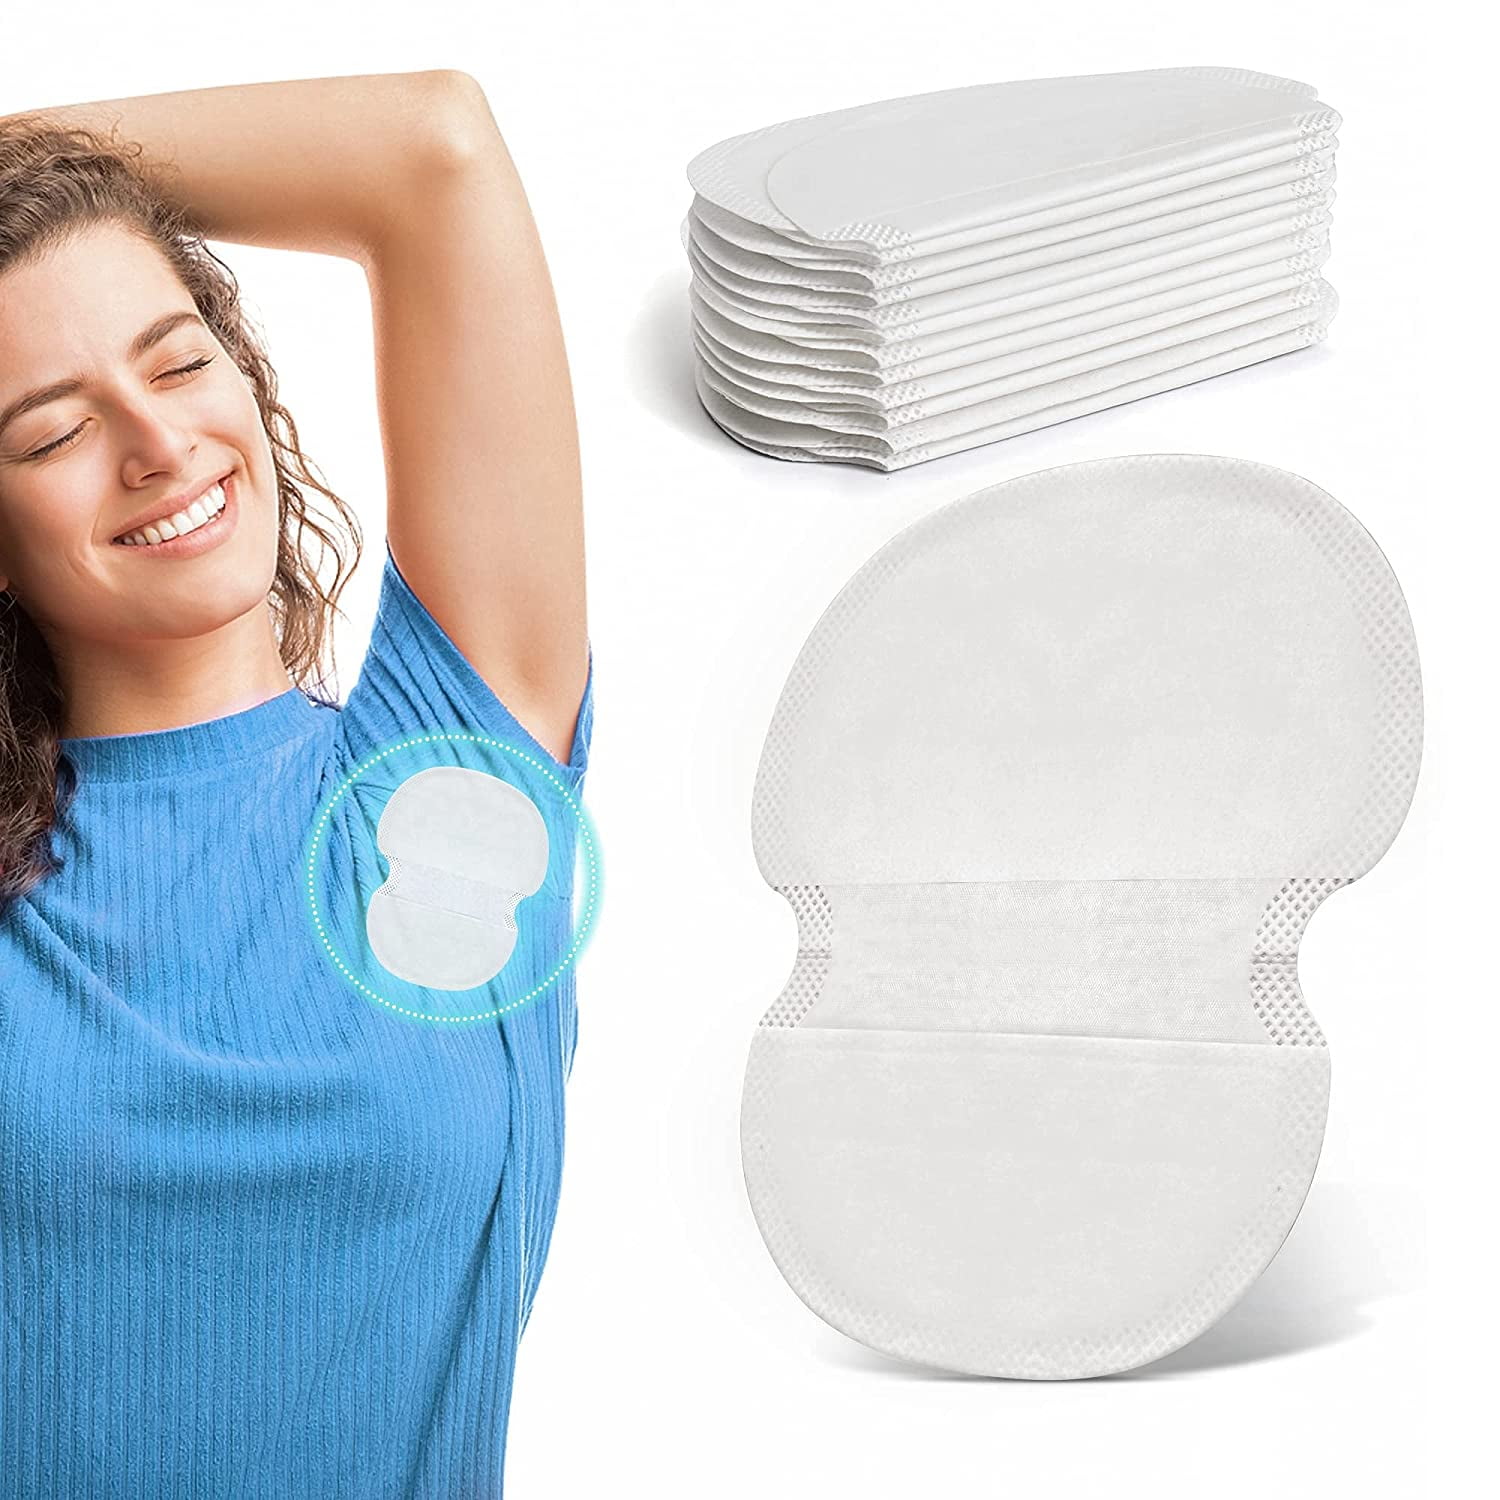 80 Ladies SWEAT PADS,DRESS SHIELDS by Axilla-Shield ™ Stop underarm stains now! 